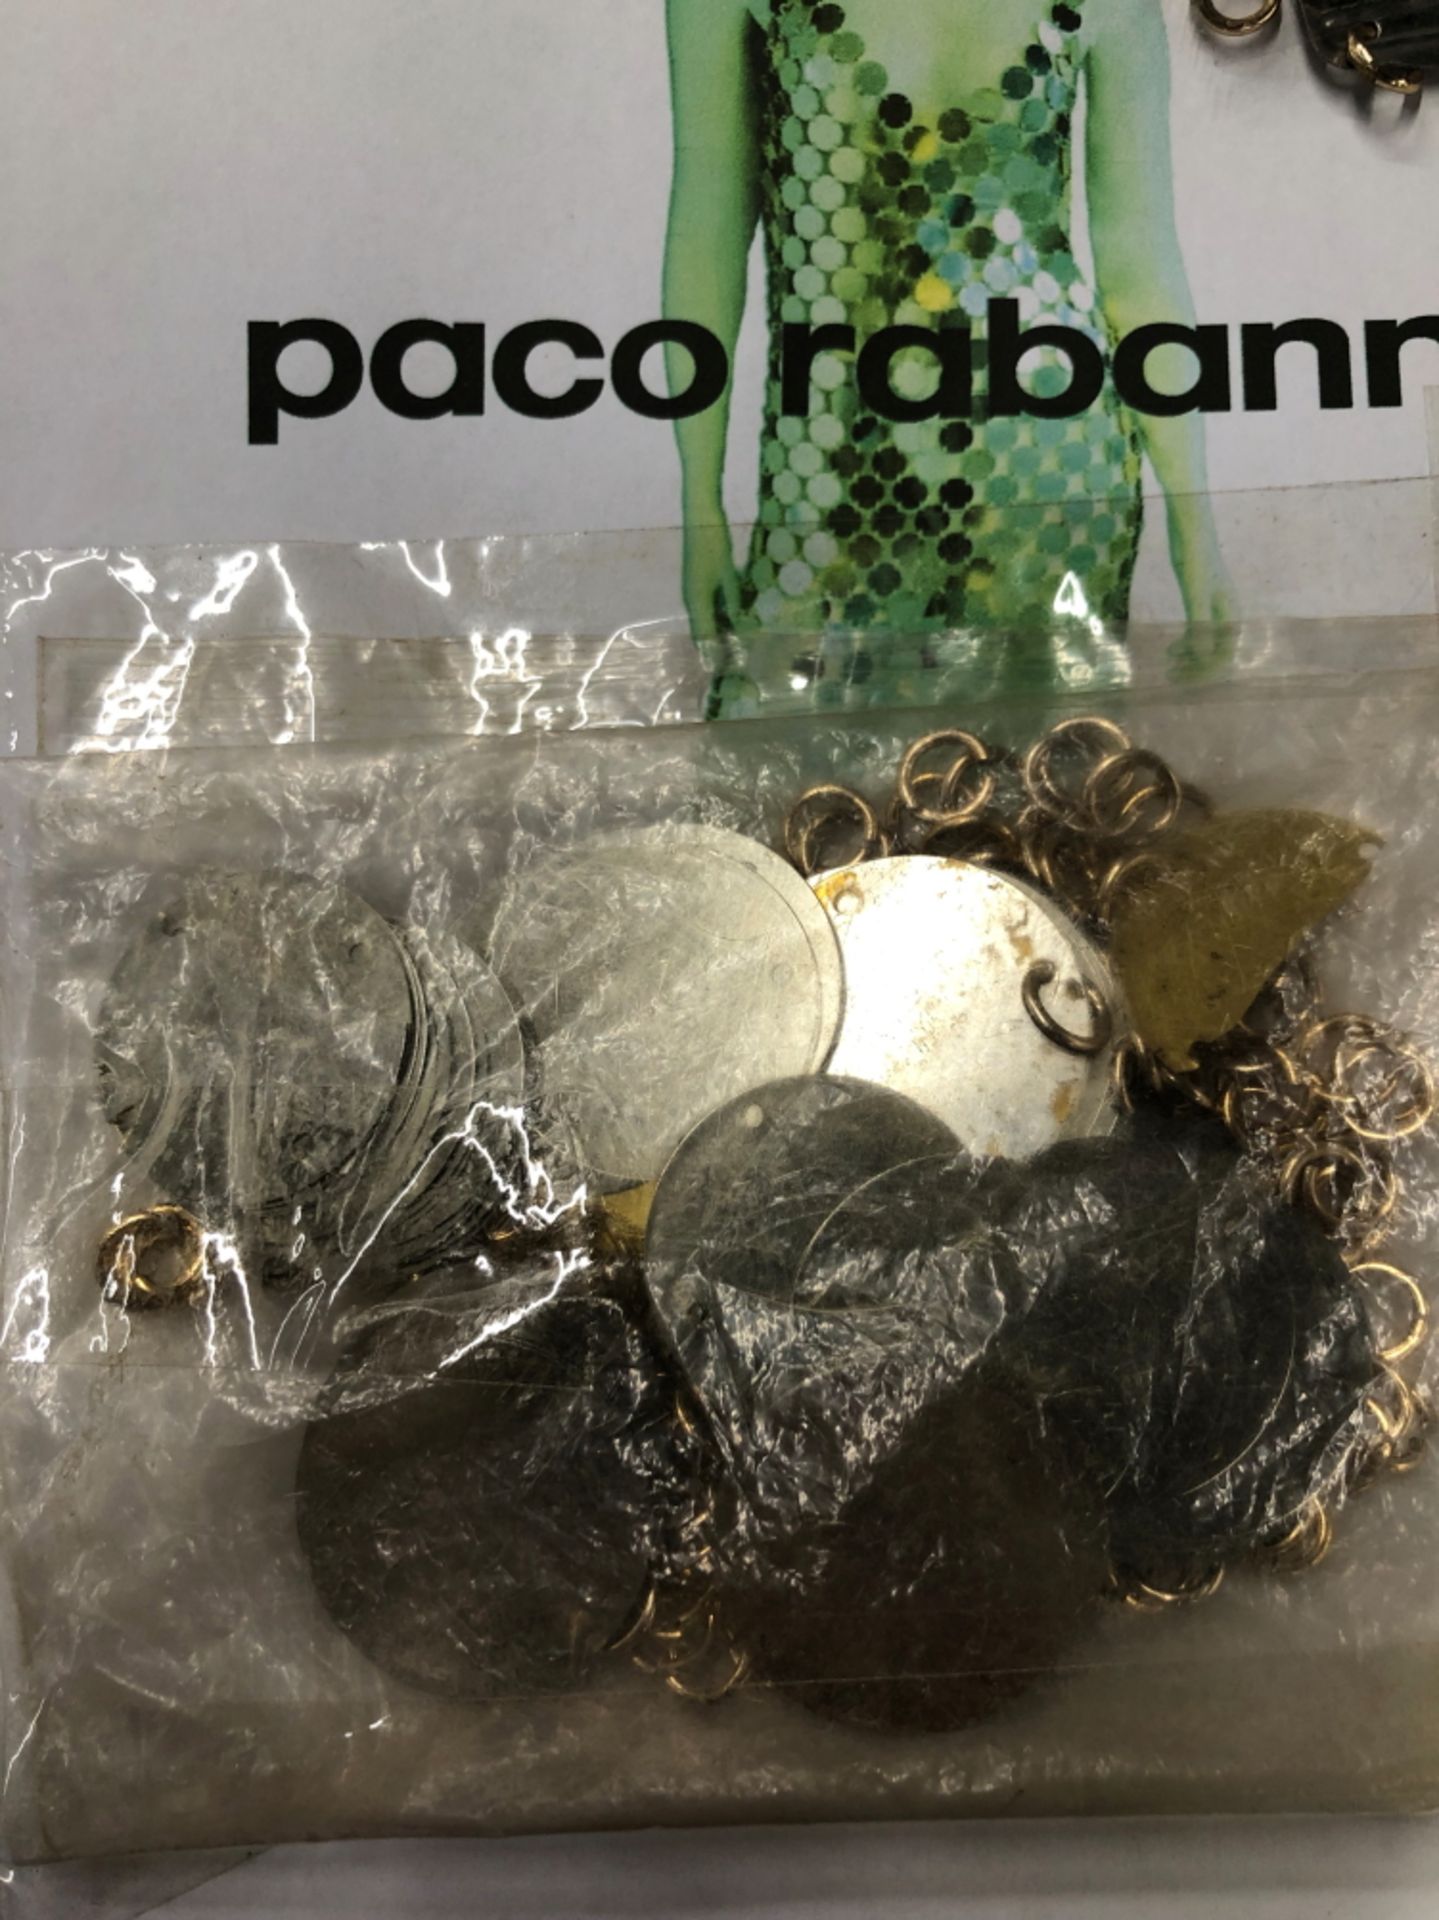 DRESS.A PACO RABANNE KIT DRESS 1997, INCLUDES ORIGINAL TAG, SEQUINS AND LINKS. - Image 17 of 17